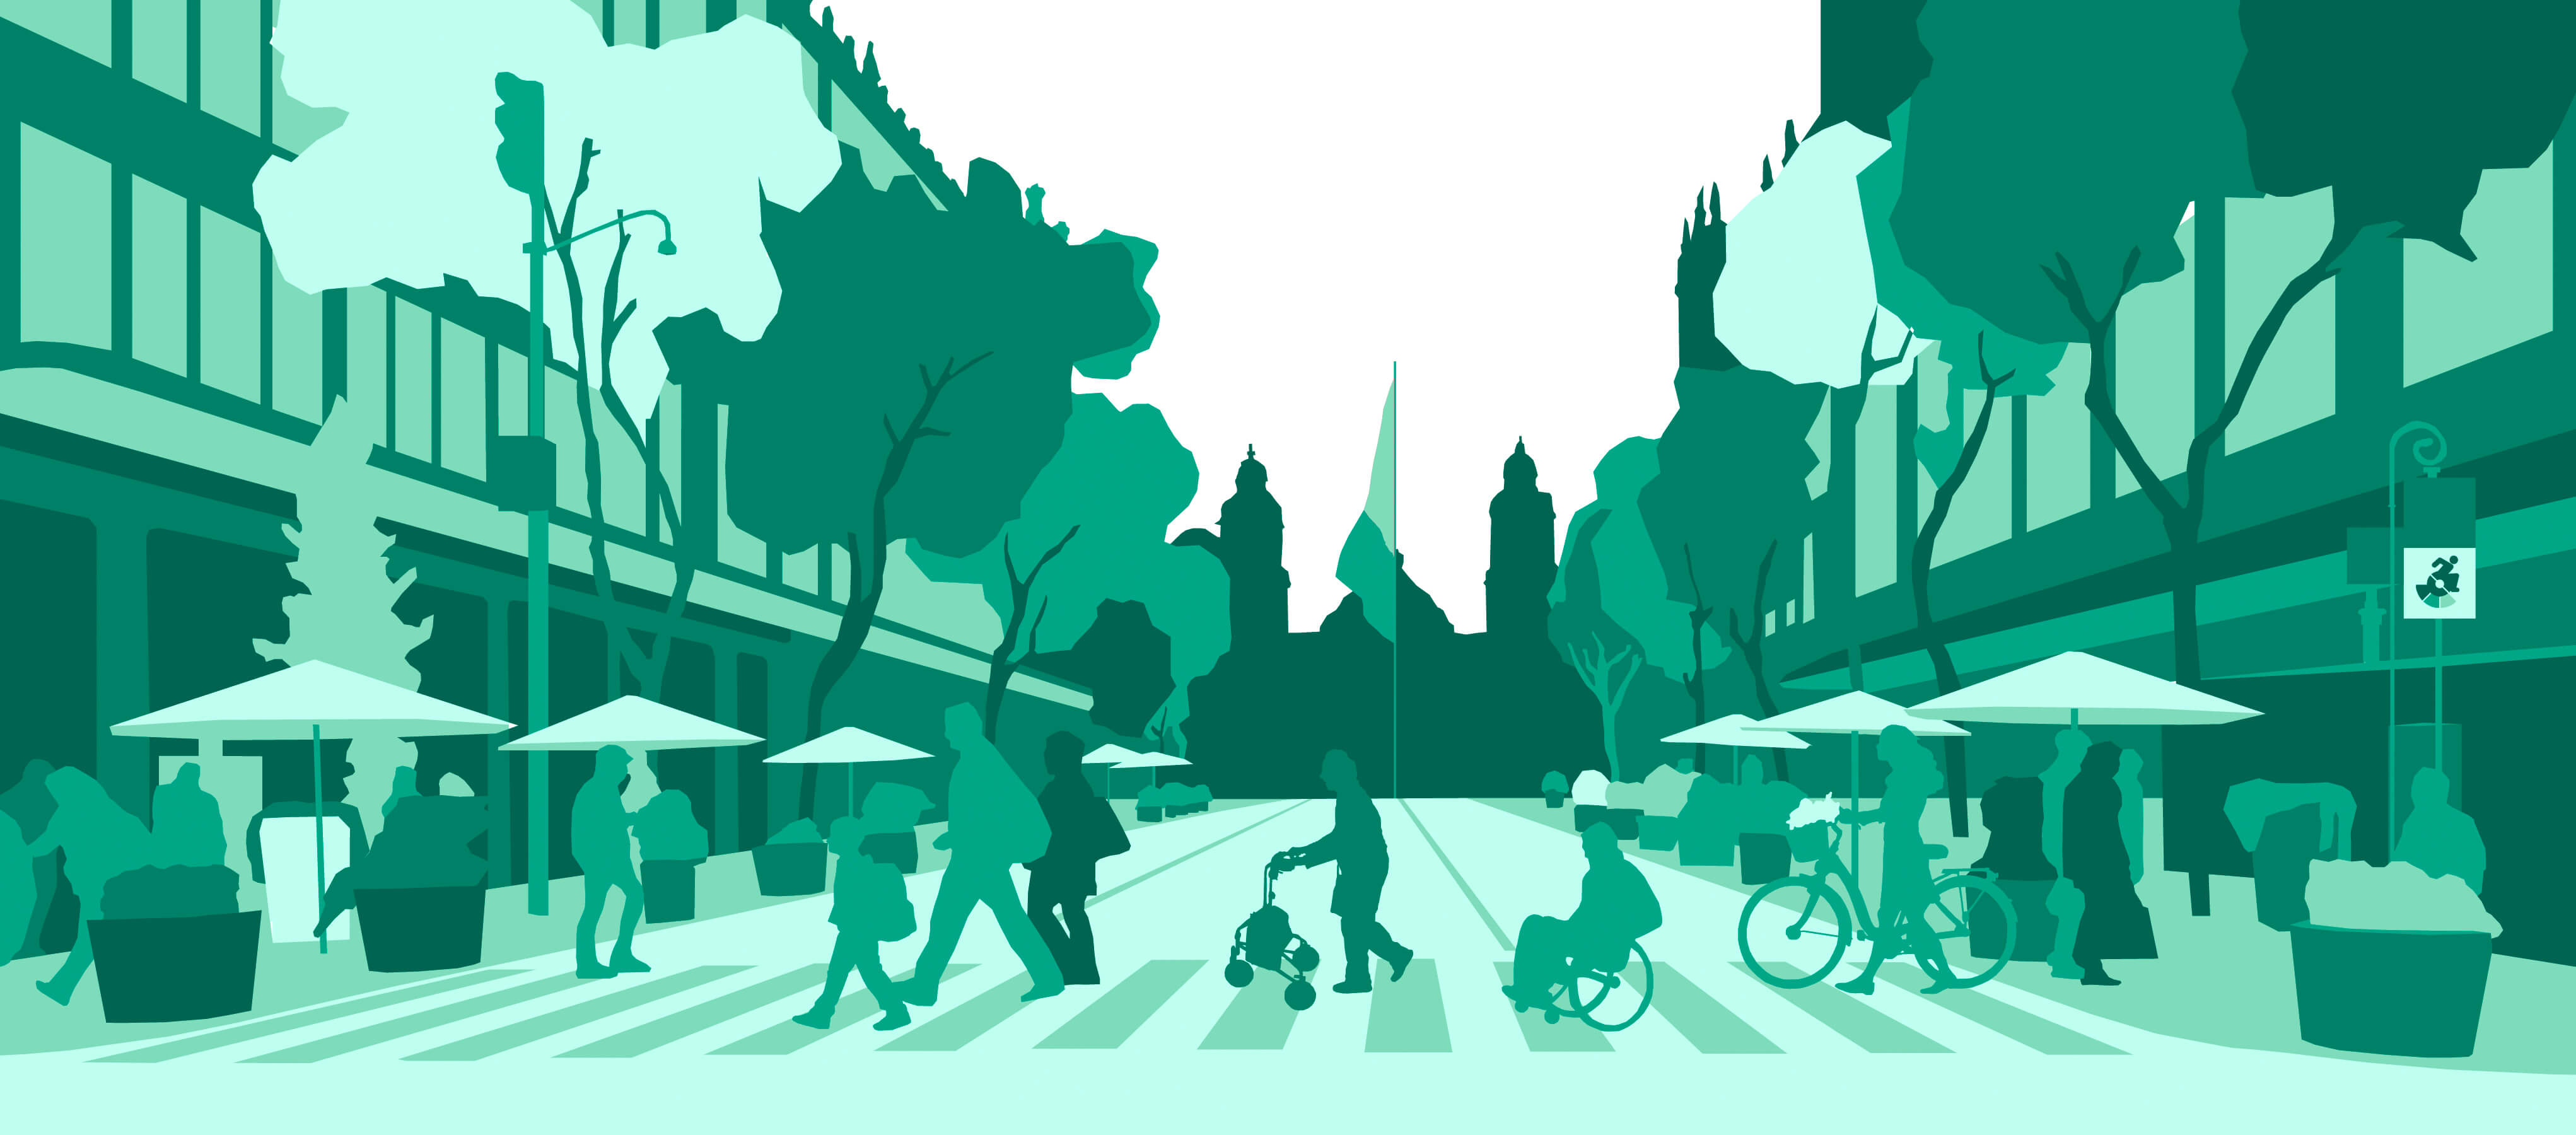 An illustration of an intersection with people traveling across the street.